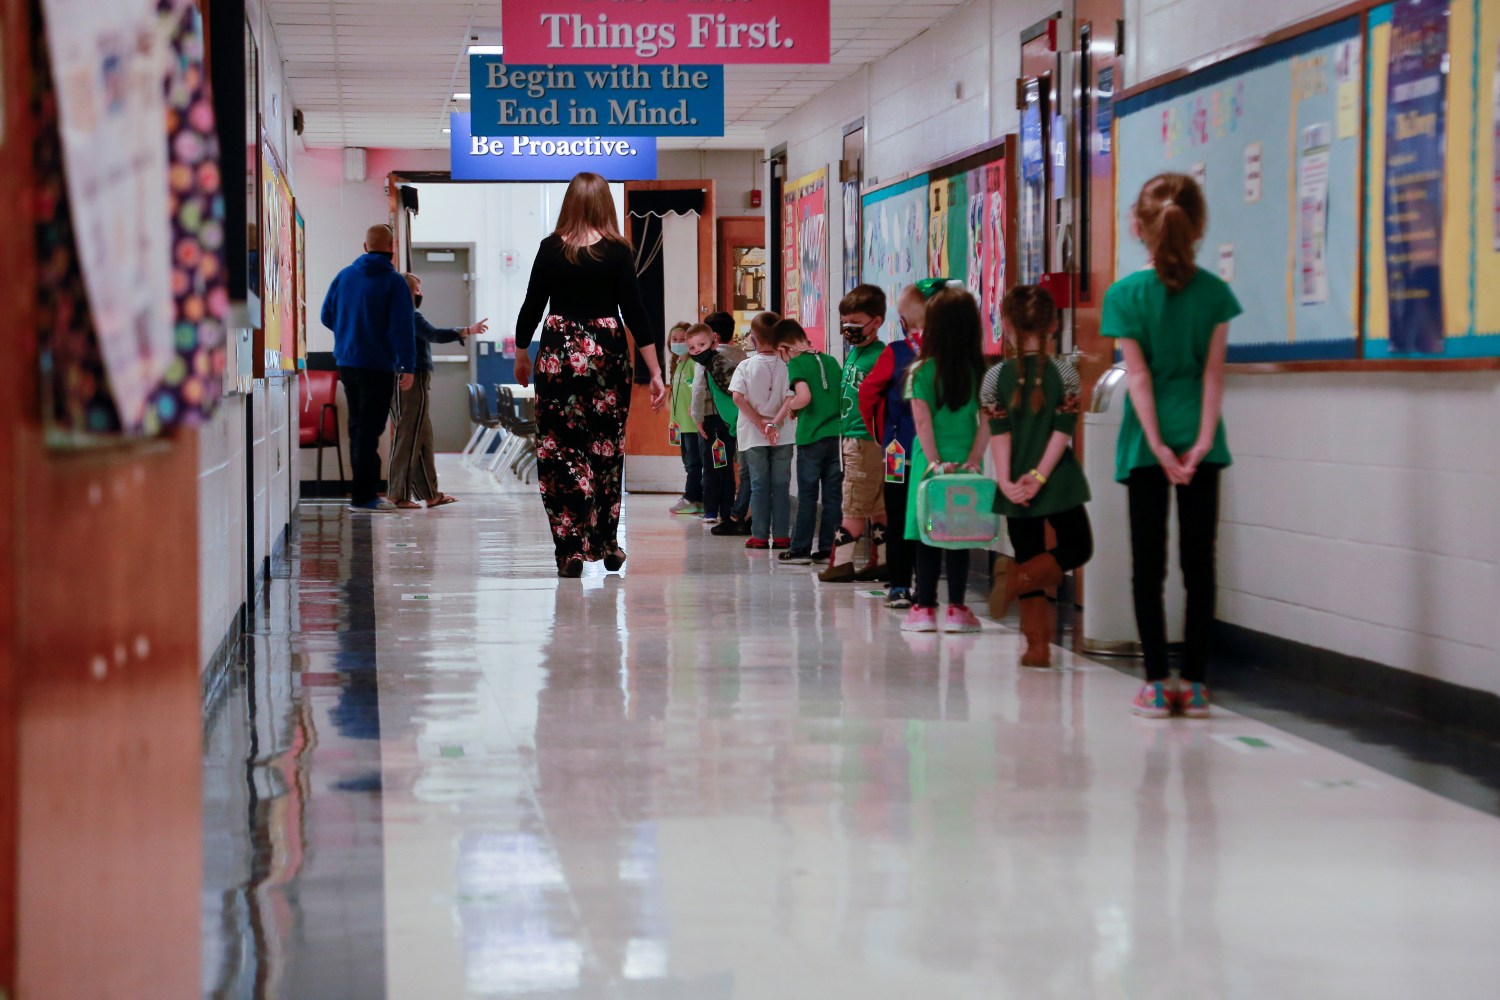 Students stand 2 feet apart as they practice social distancing before walking into the cafeteria on the first day back to school after coronavirus disease (COVID-19) restrictions were adjusted, in Louisville, Kentucky,